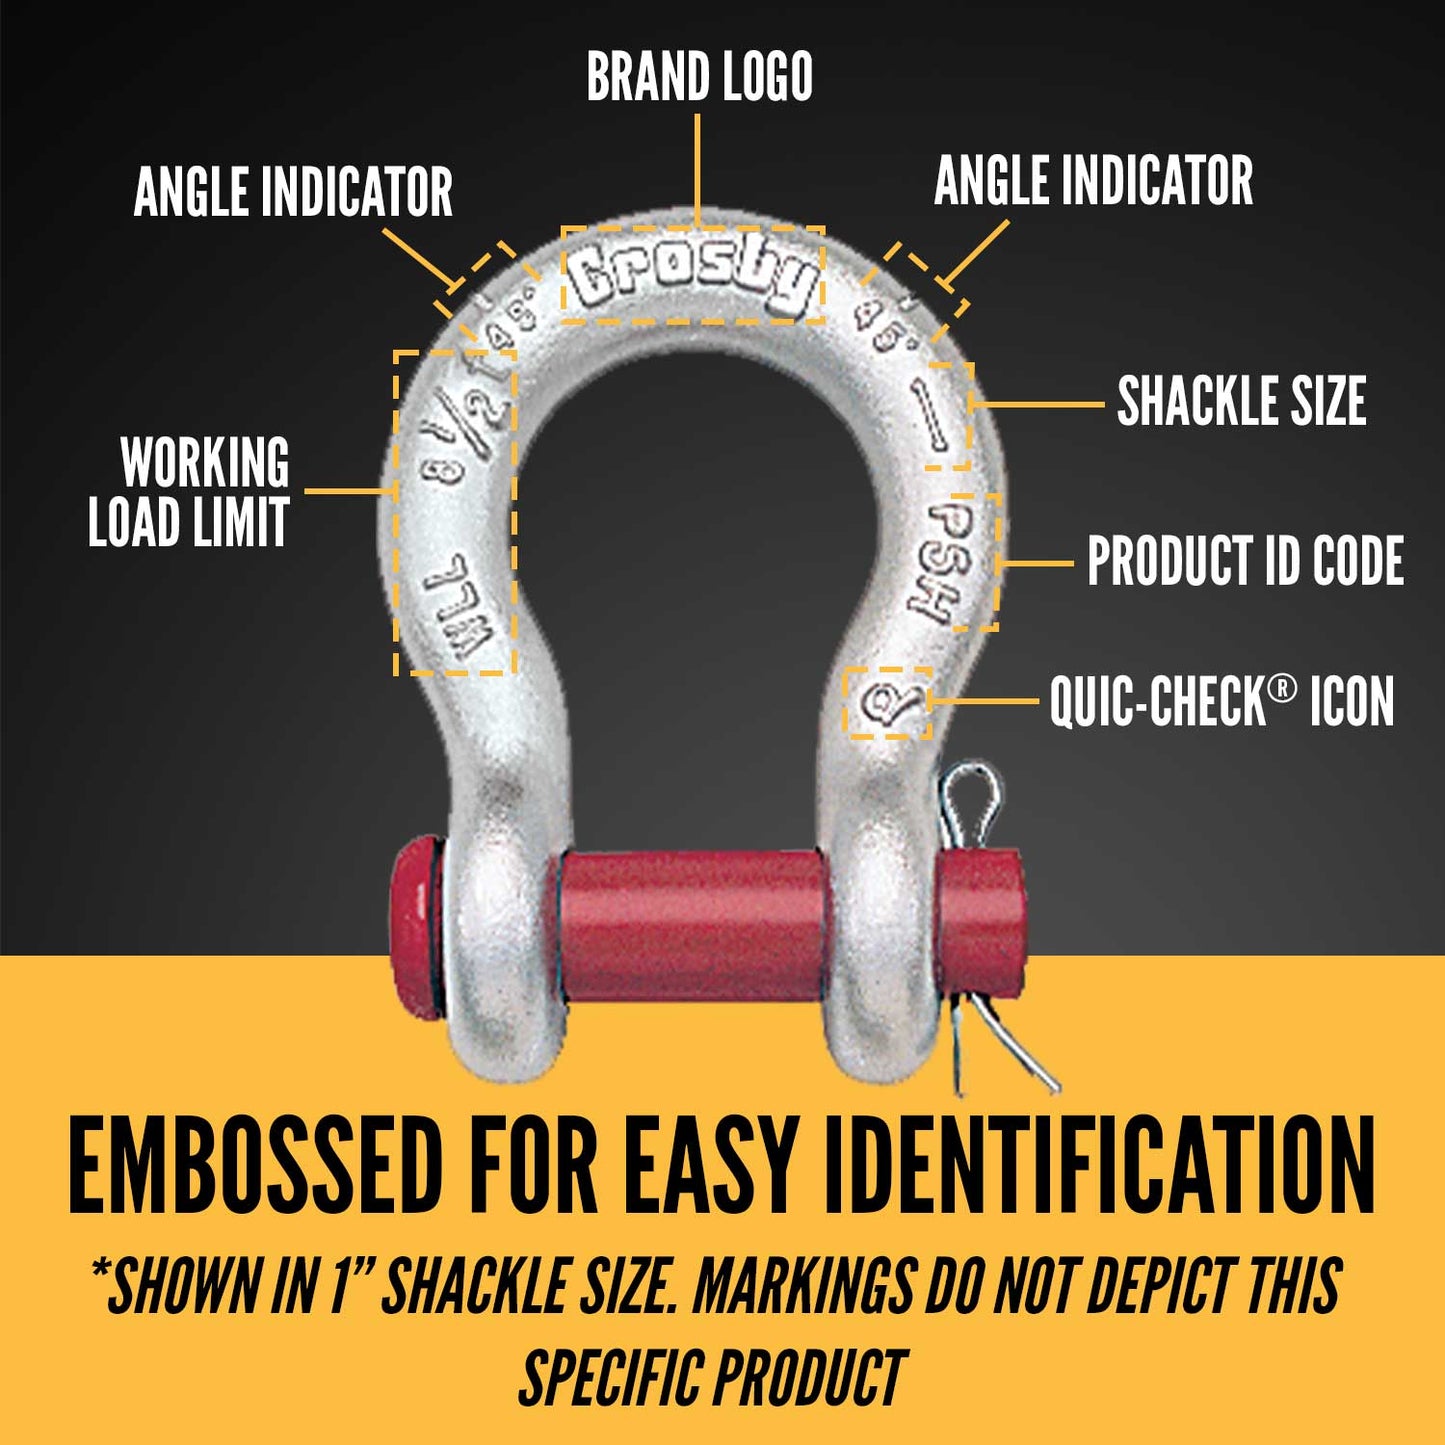 1/2" Crosby® Round Pin Anchor Shackle | G-213 - 2 Ton embossed for easy identification